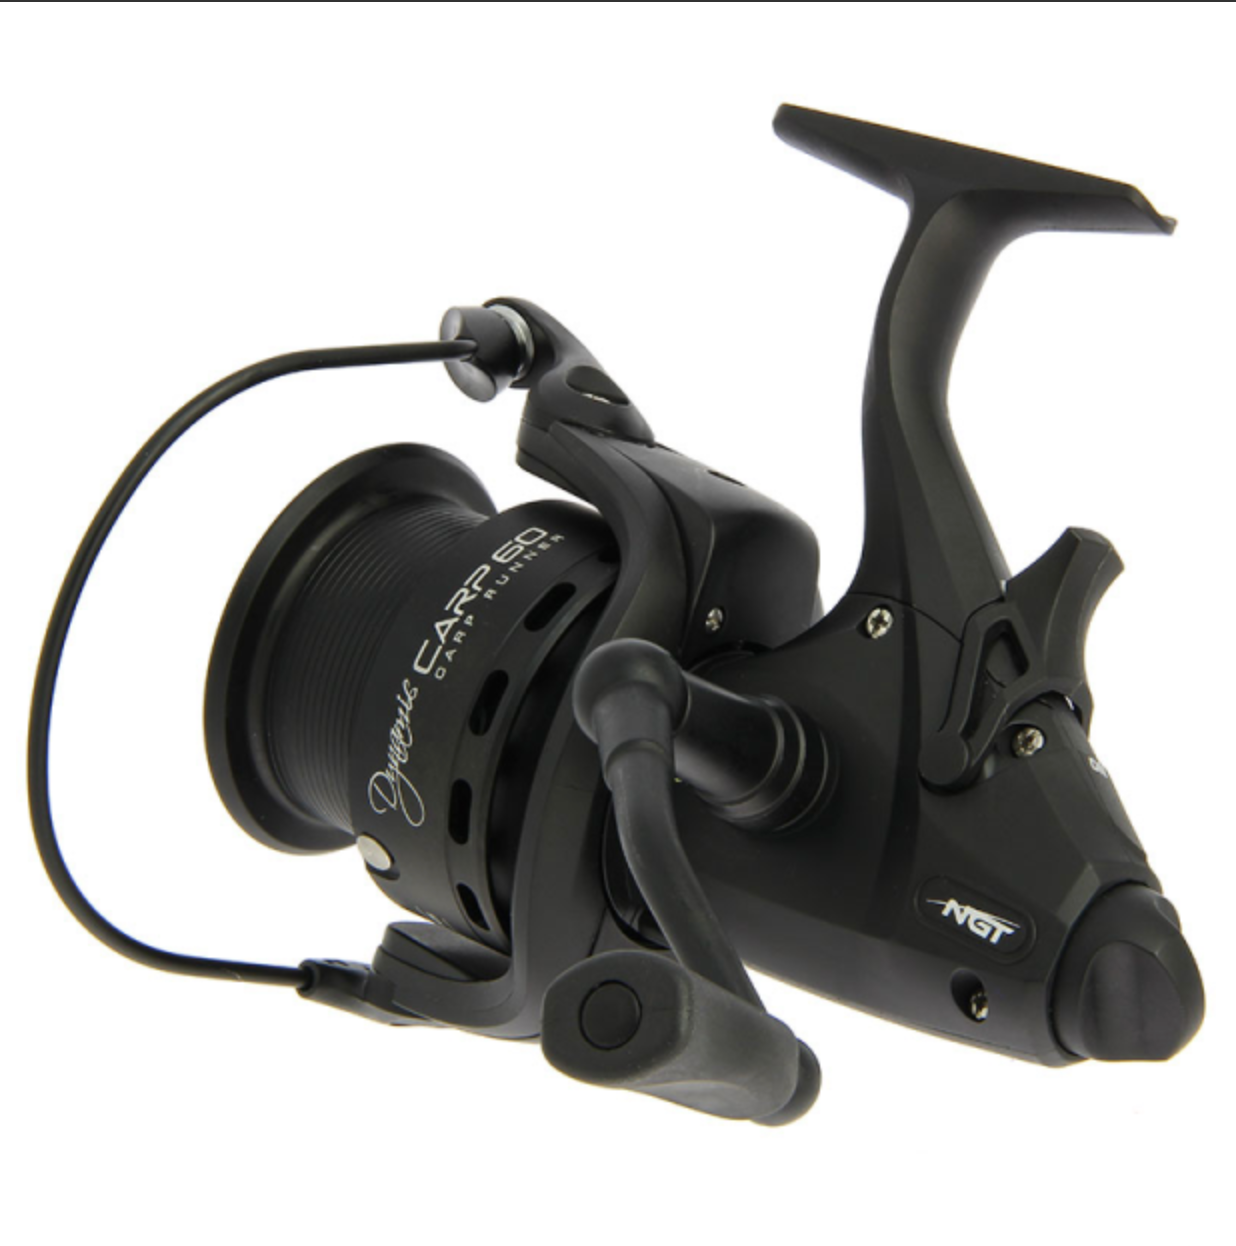 NGT Camo60 3BB 'Carp Runner' Reel With 12lb Line + Spare Spool > Carp Rods  & Reels